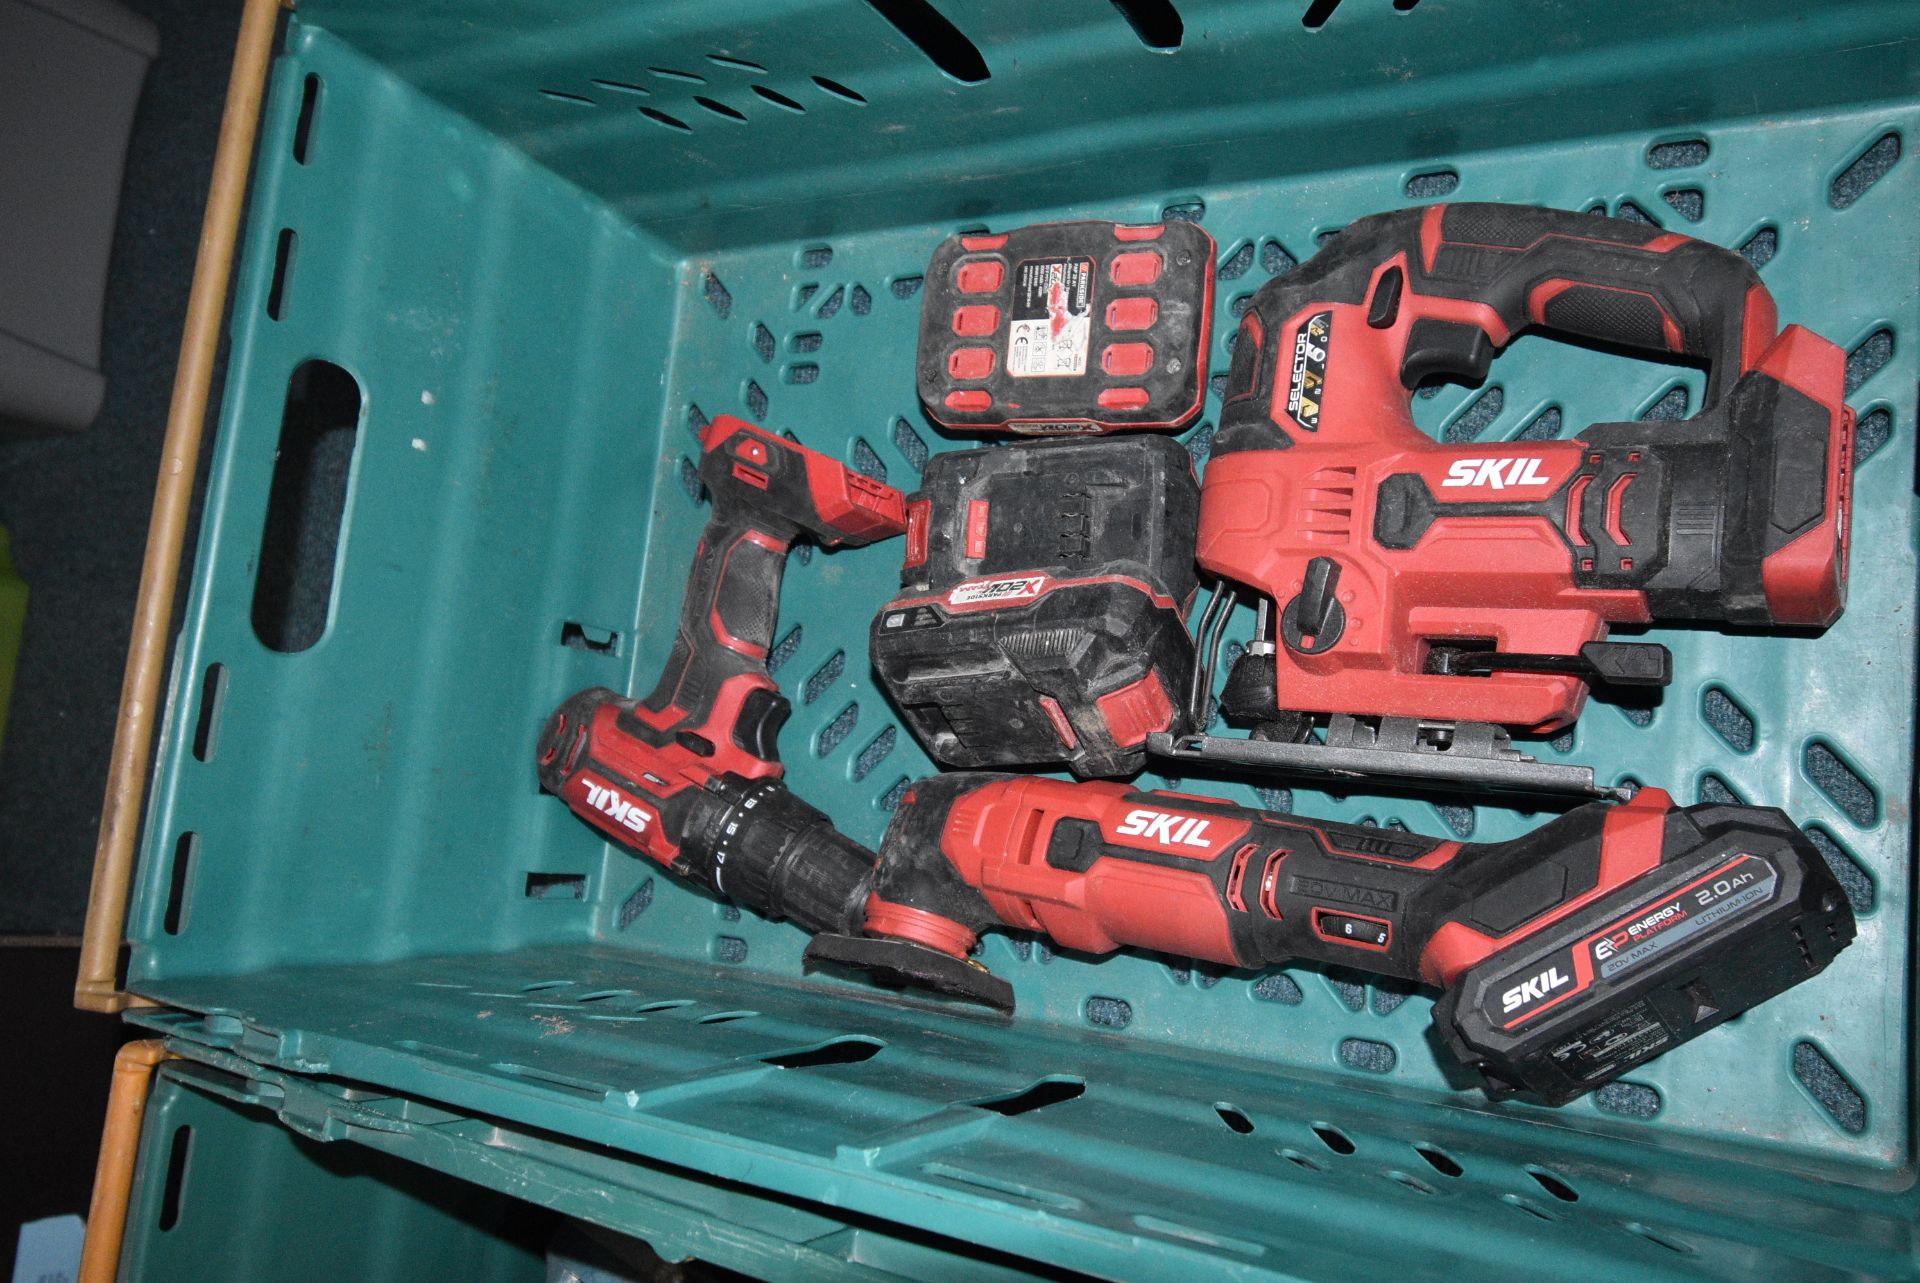 Skil Cordless Tools Including Jig Saw, Drill, and Sander with Batteries